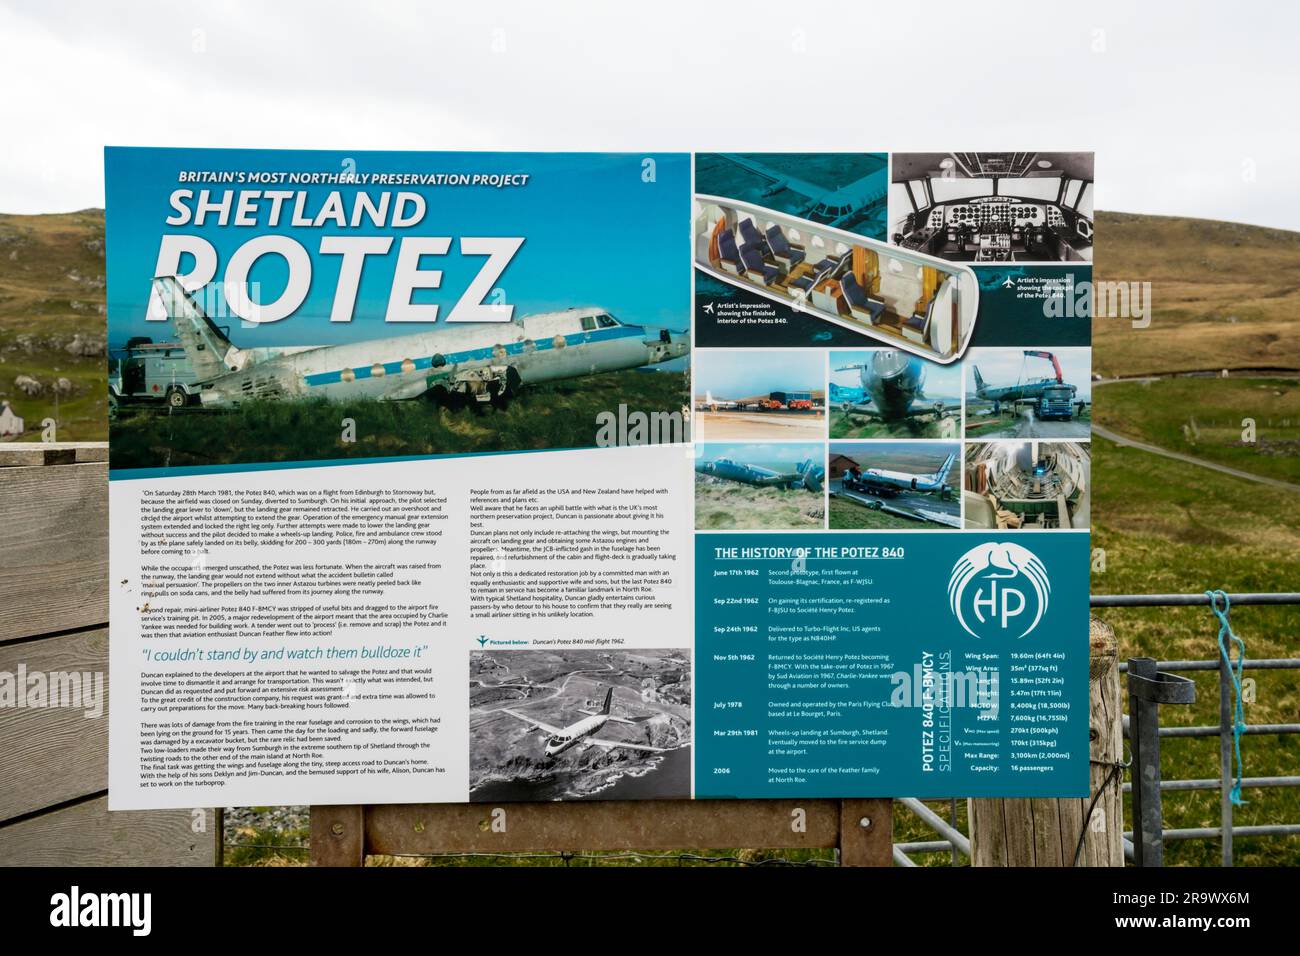 Interpretive sign with tourist information about the Potez 840 aircraft fuselage in the garden of a house at North Roe, Shetland. Stock Photo